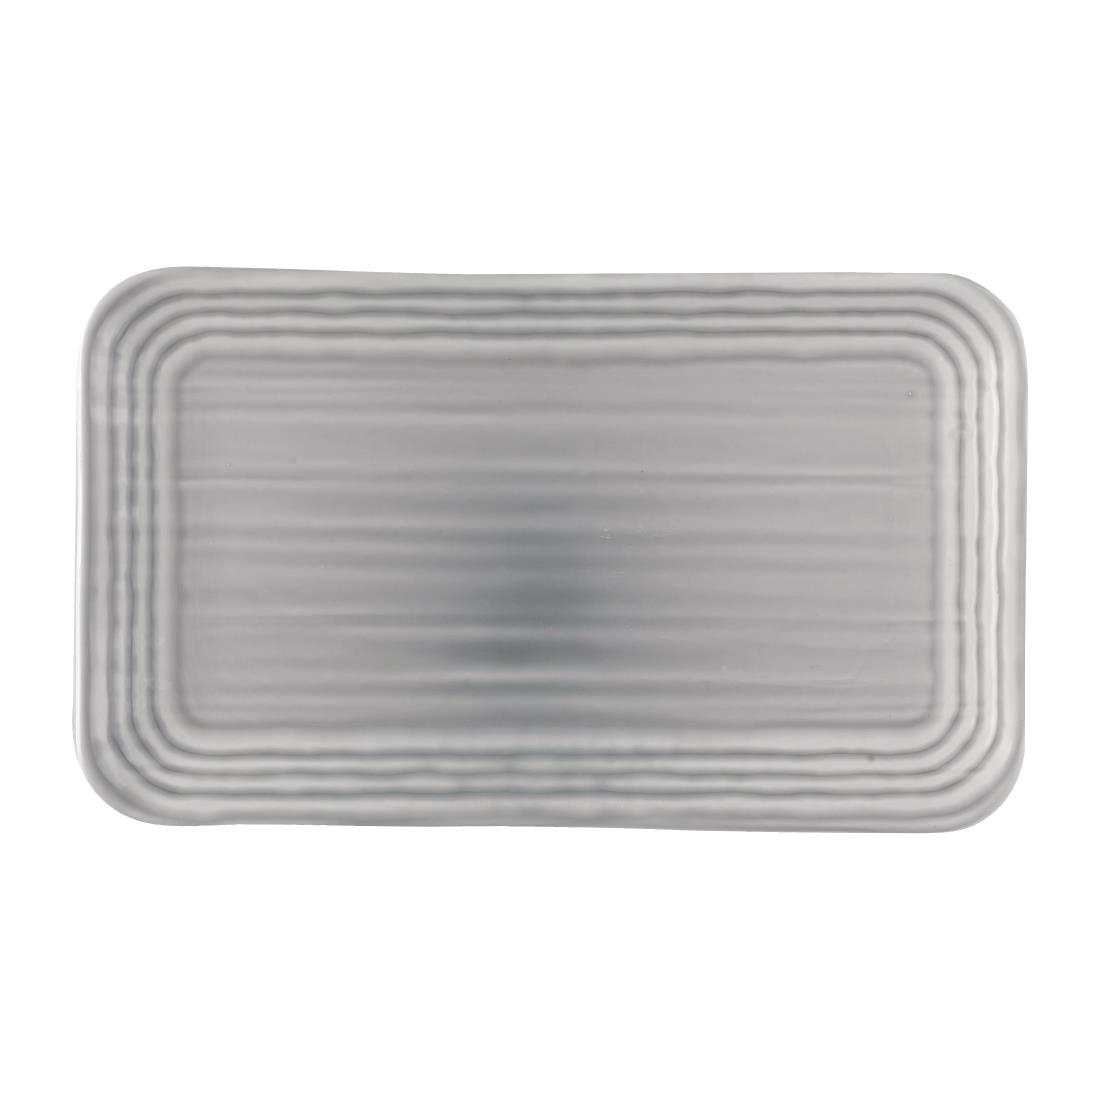 Dudson Harvest Norse Organic Rect Plate Grey 269mmx160mm (Pack of 12)